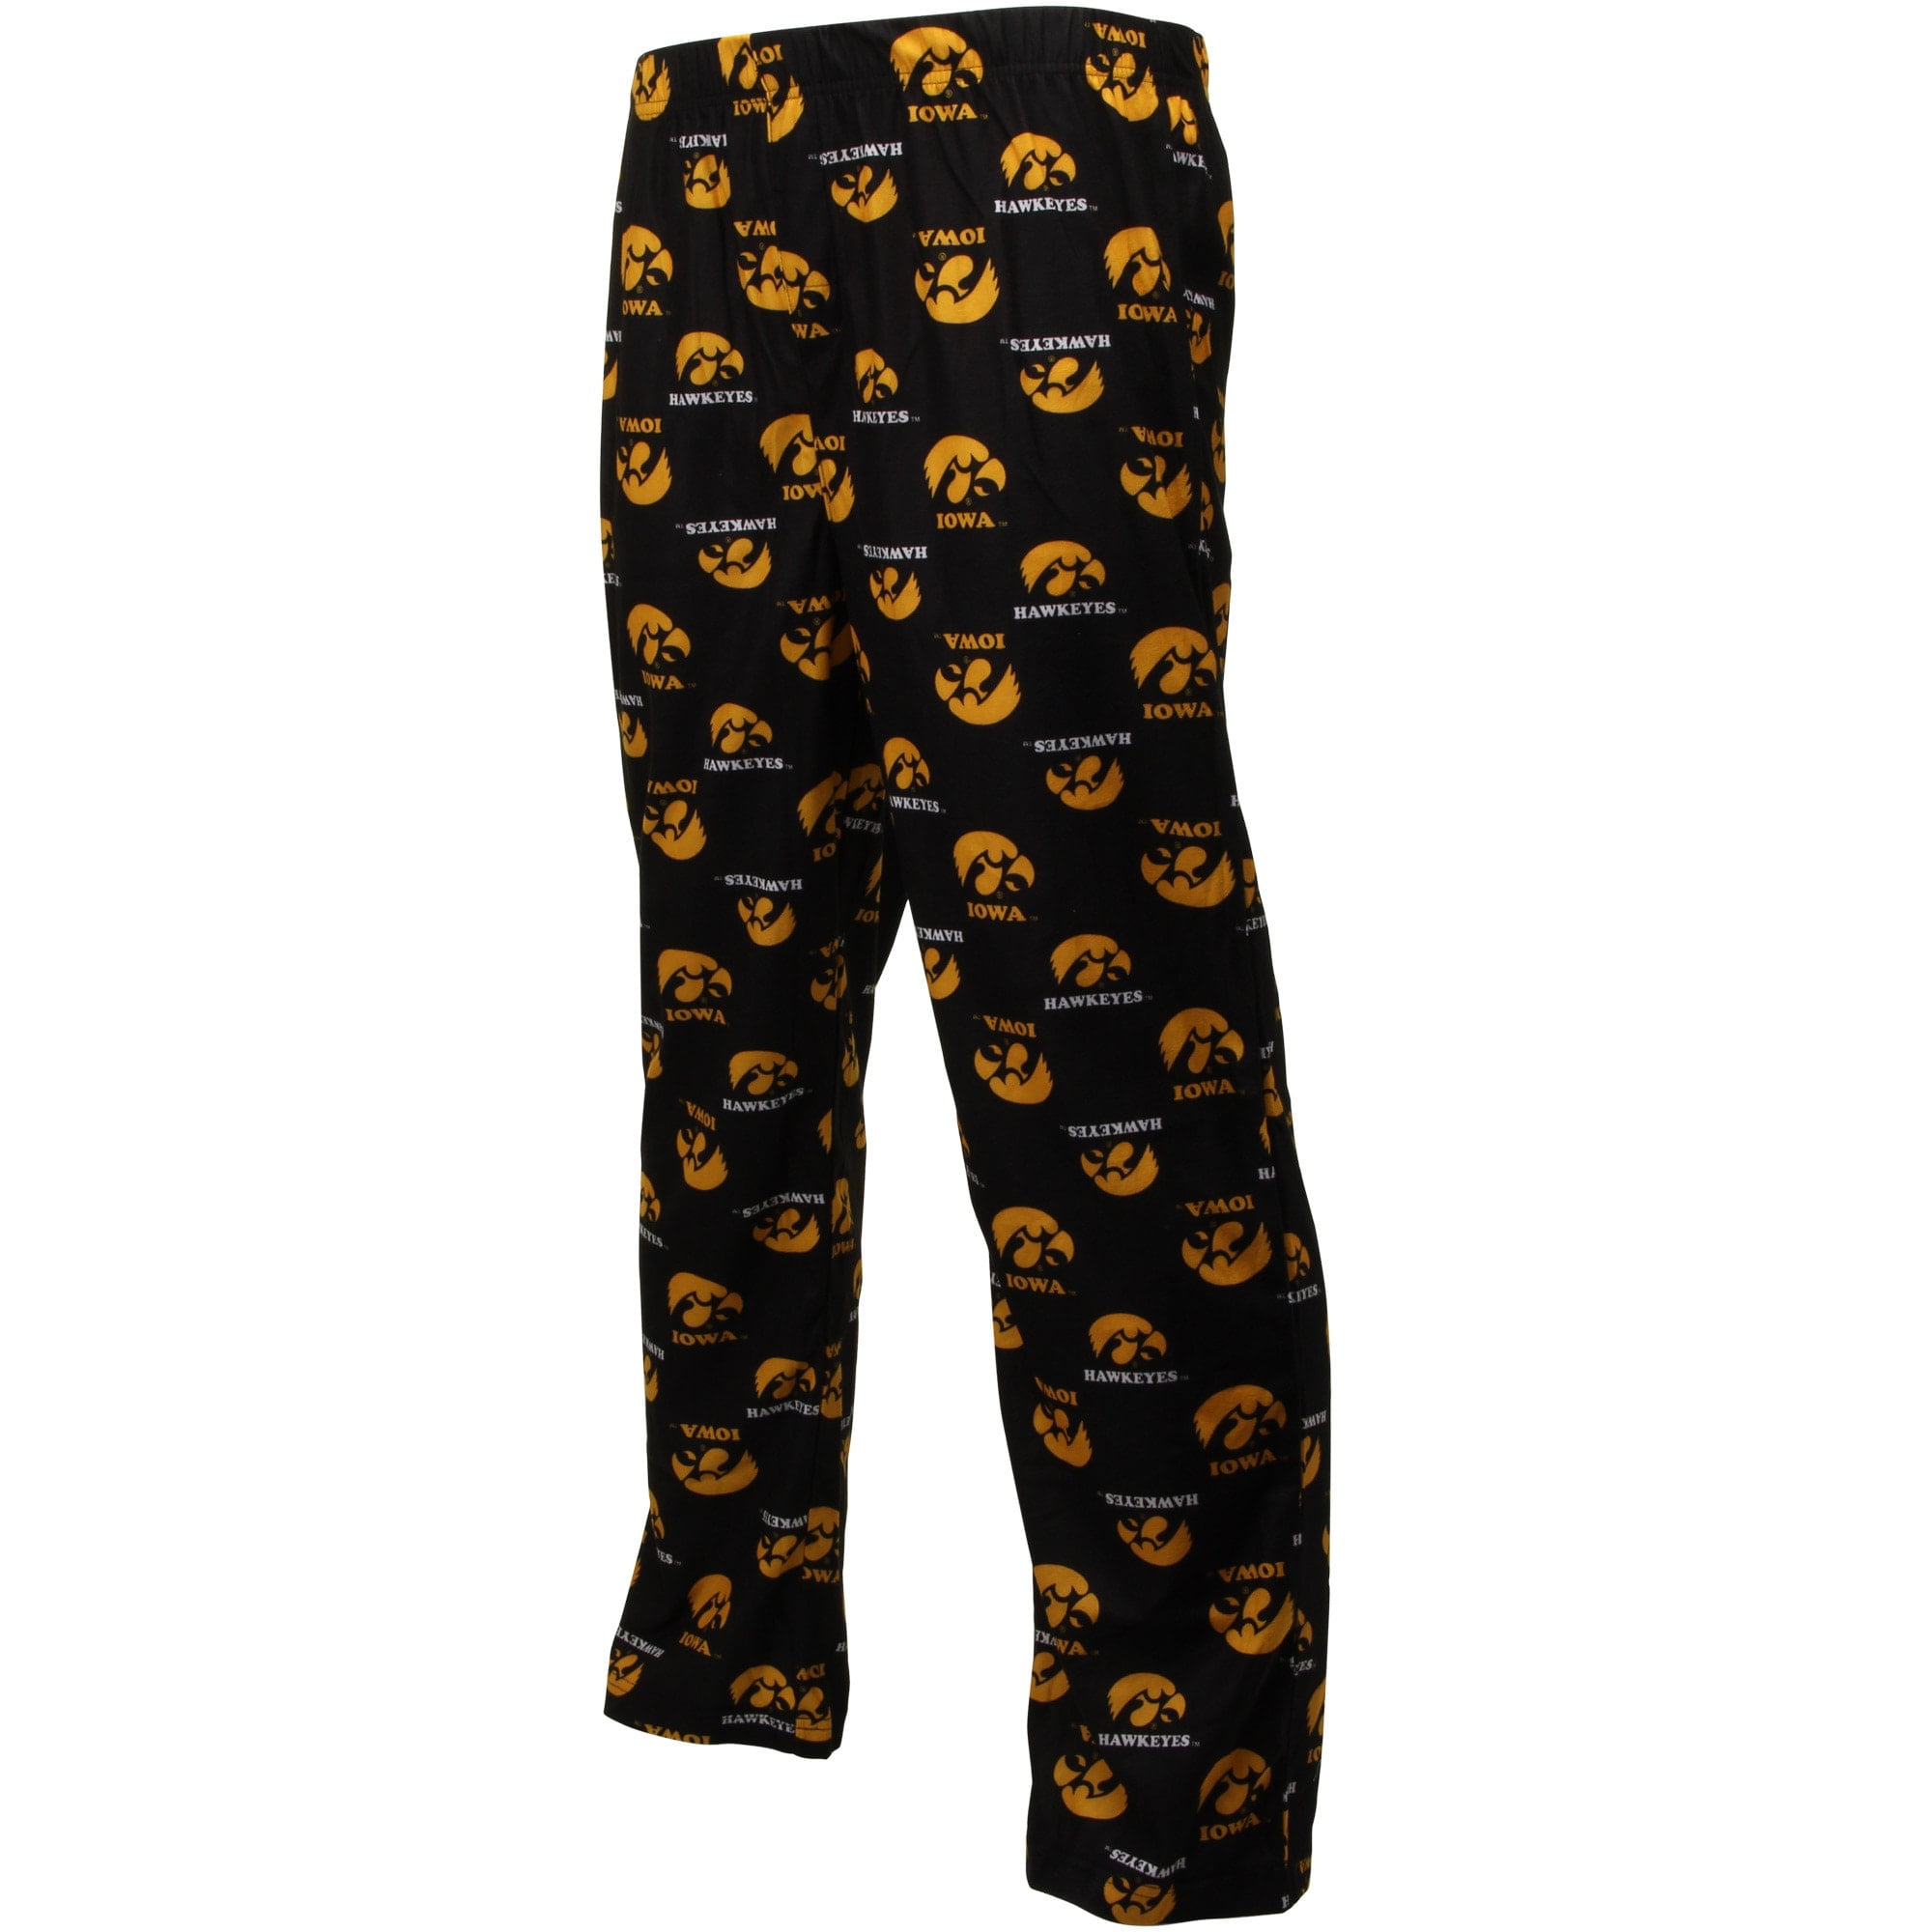 Outerstuff Iowa Hawkeyes Kids All Over Printed Pajama Shorts 